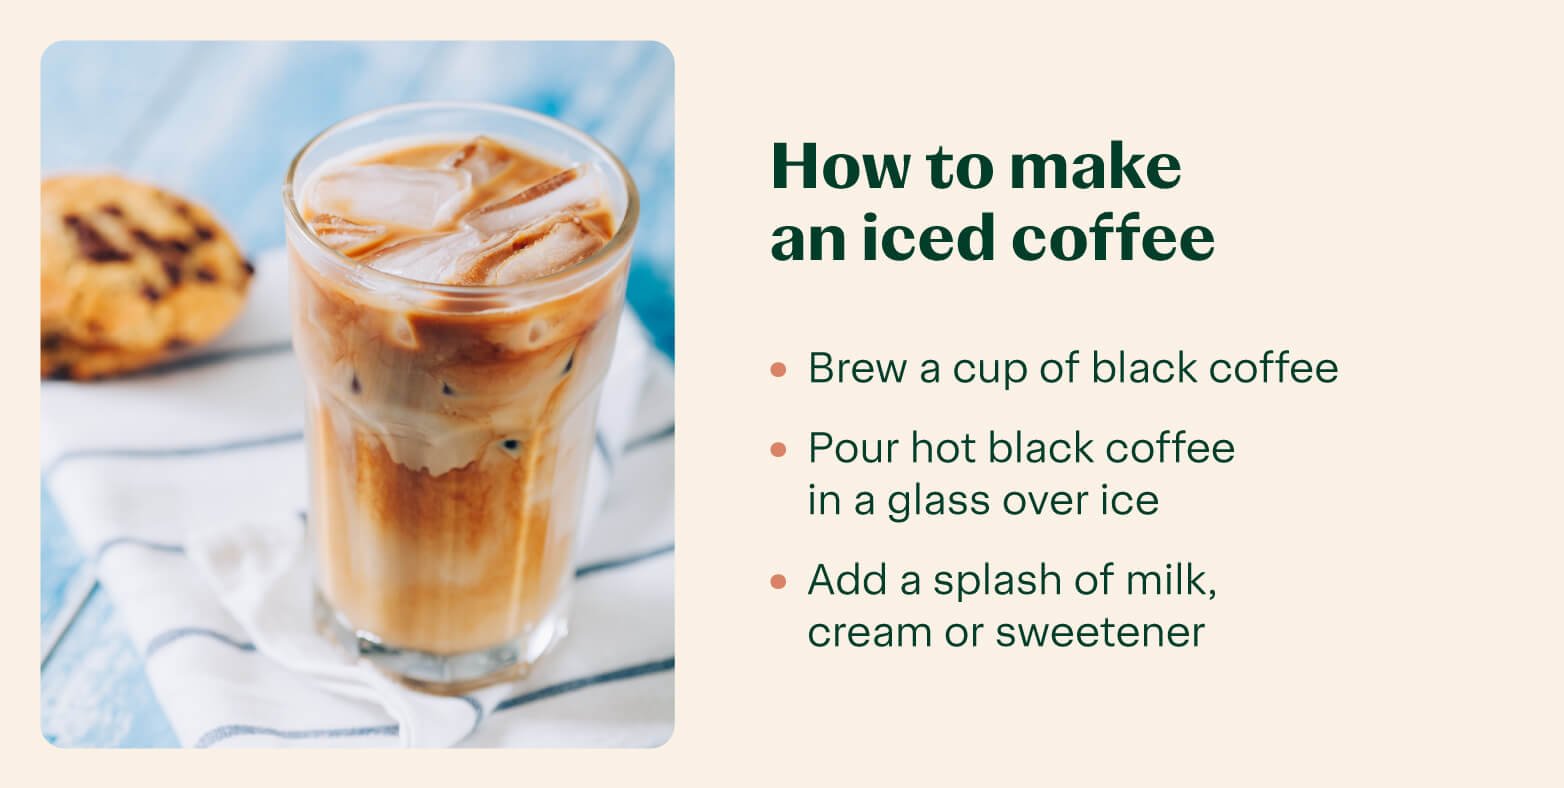 https://www.instacart.com/company/wp-content/uploads/2022/08/how-to-make-an-iced-coffee.jpg